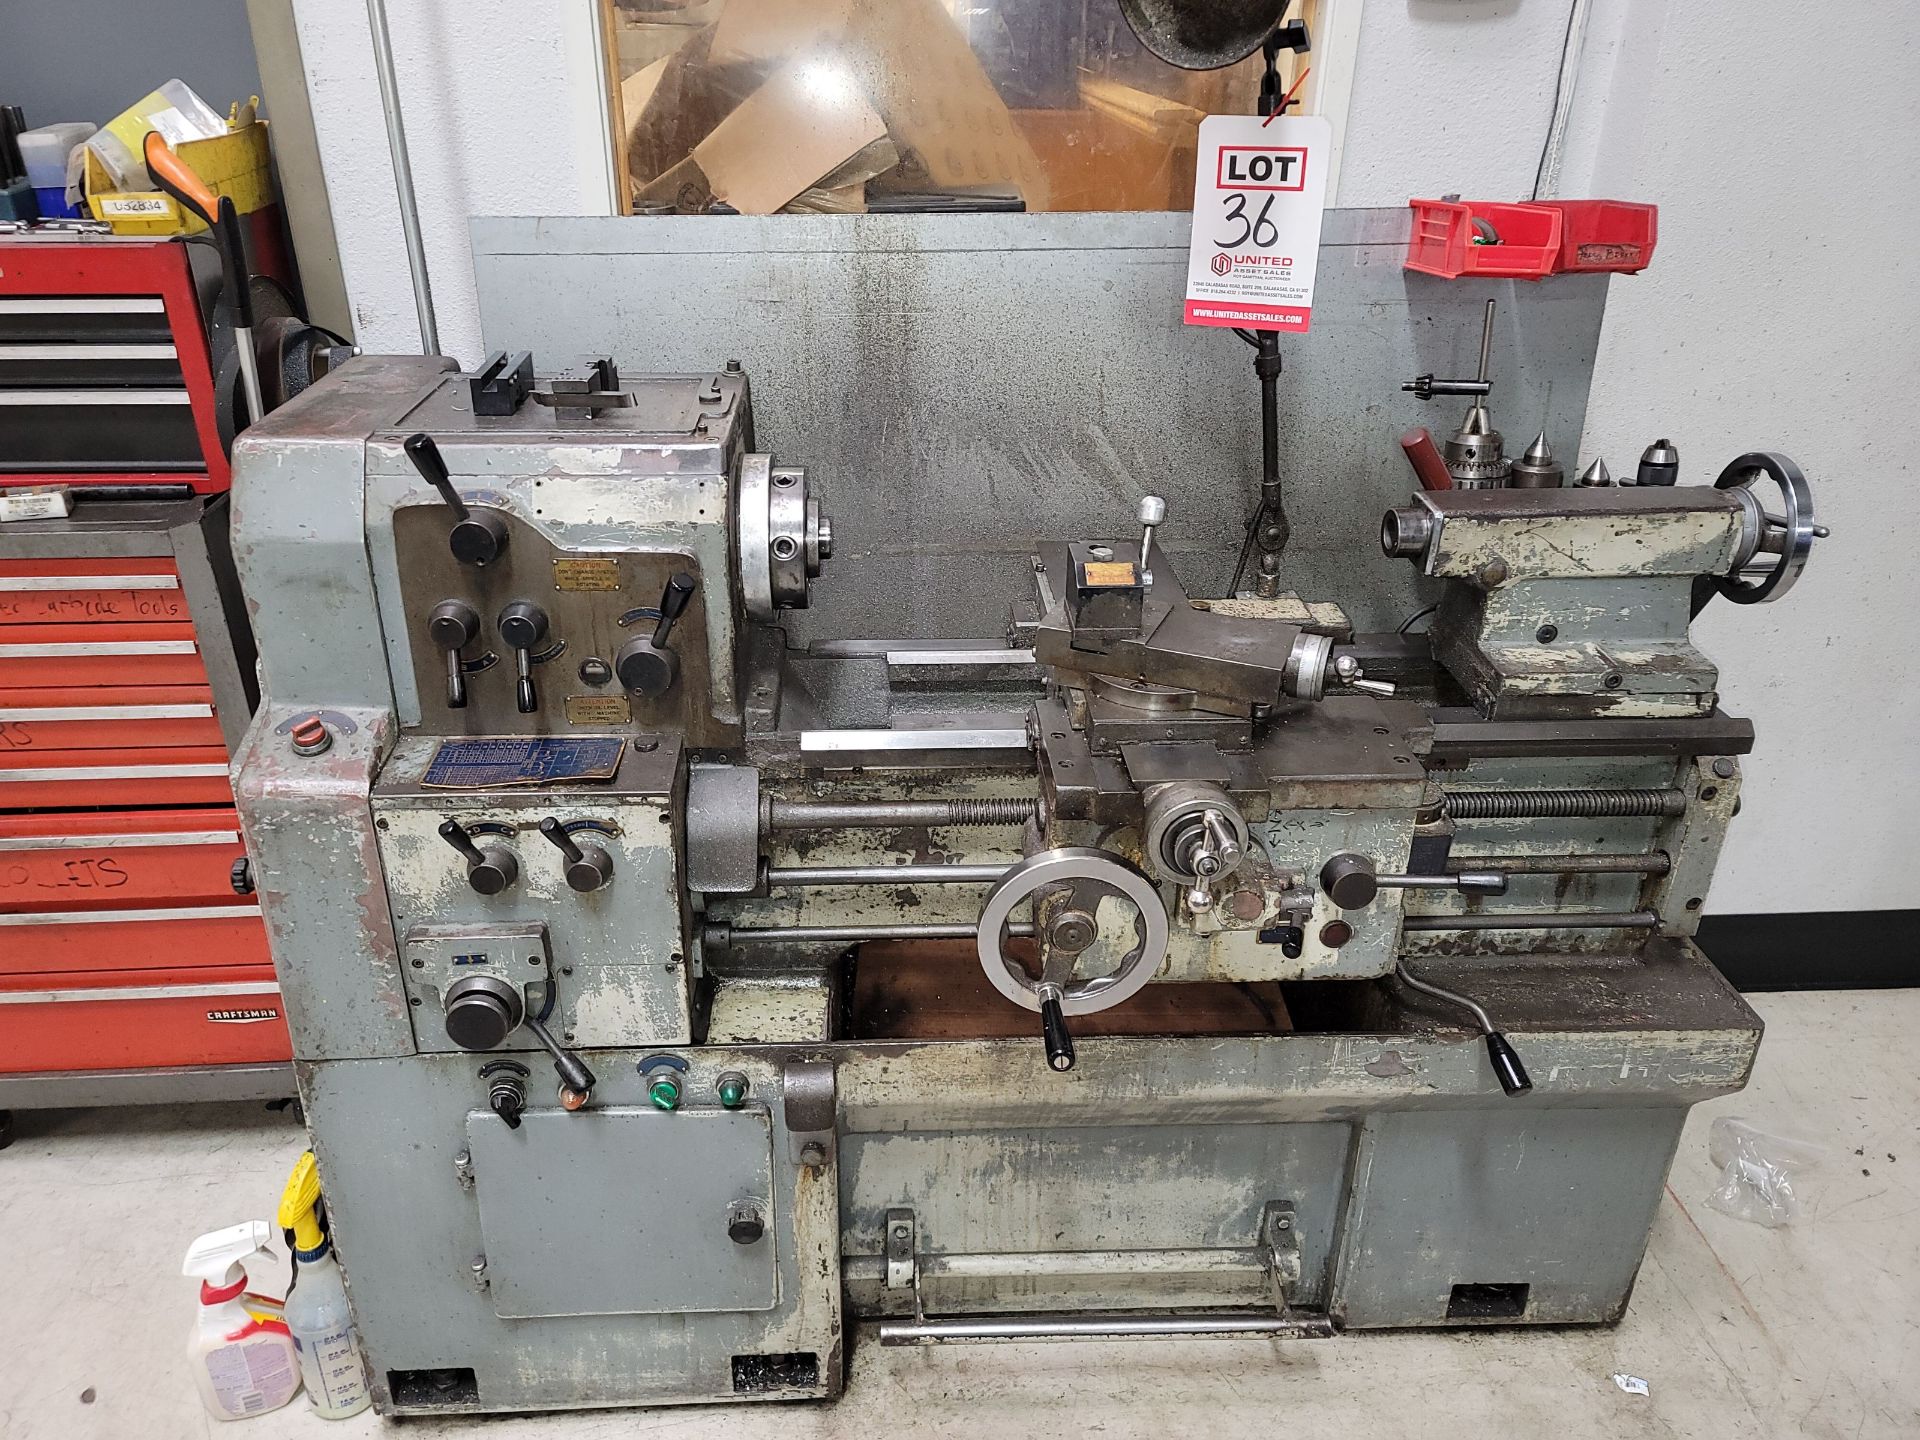 CADILLAC 1422 GAP BED ENGINE LATHE, TOOL POST, TAILSTOCK, STEADY REST, 5C COLLET CHUCK, PLUS 8"